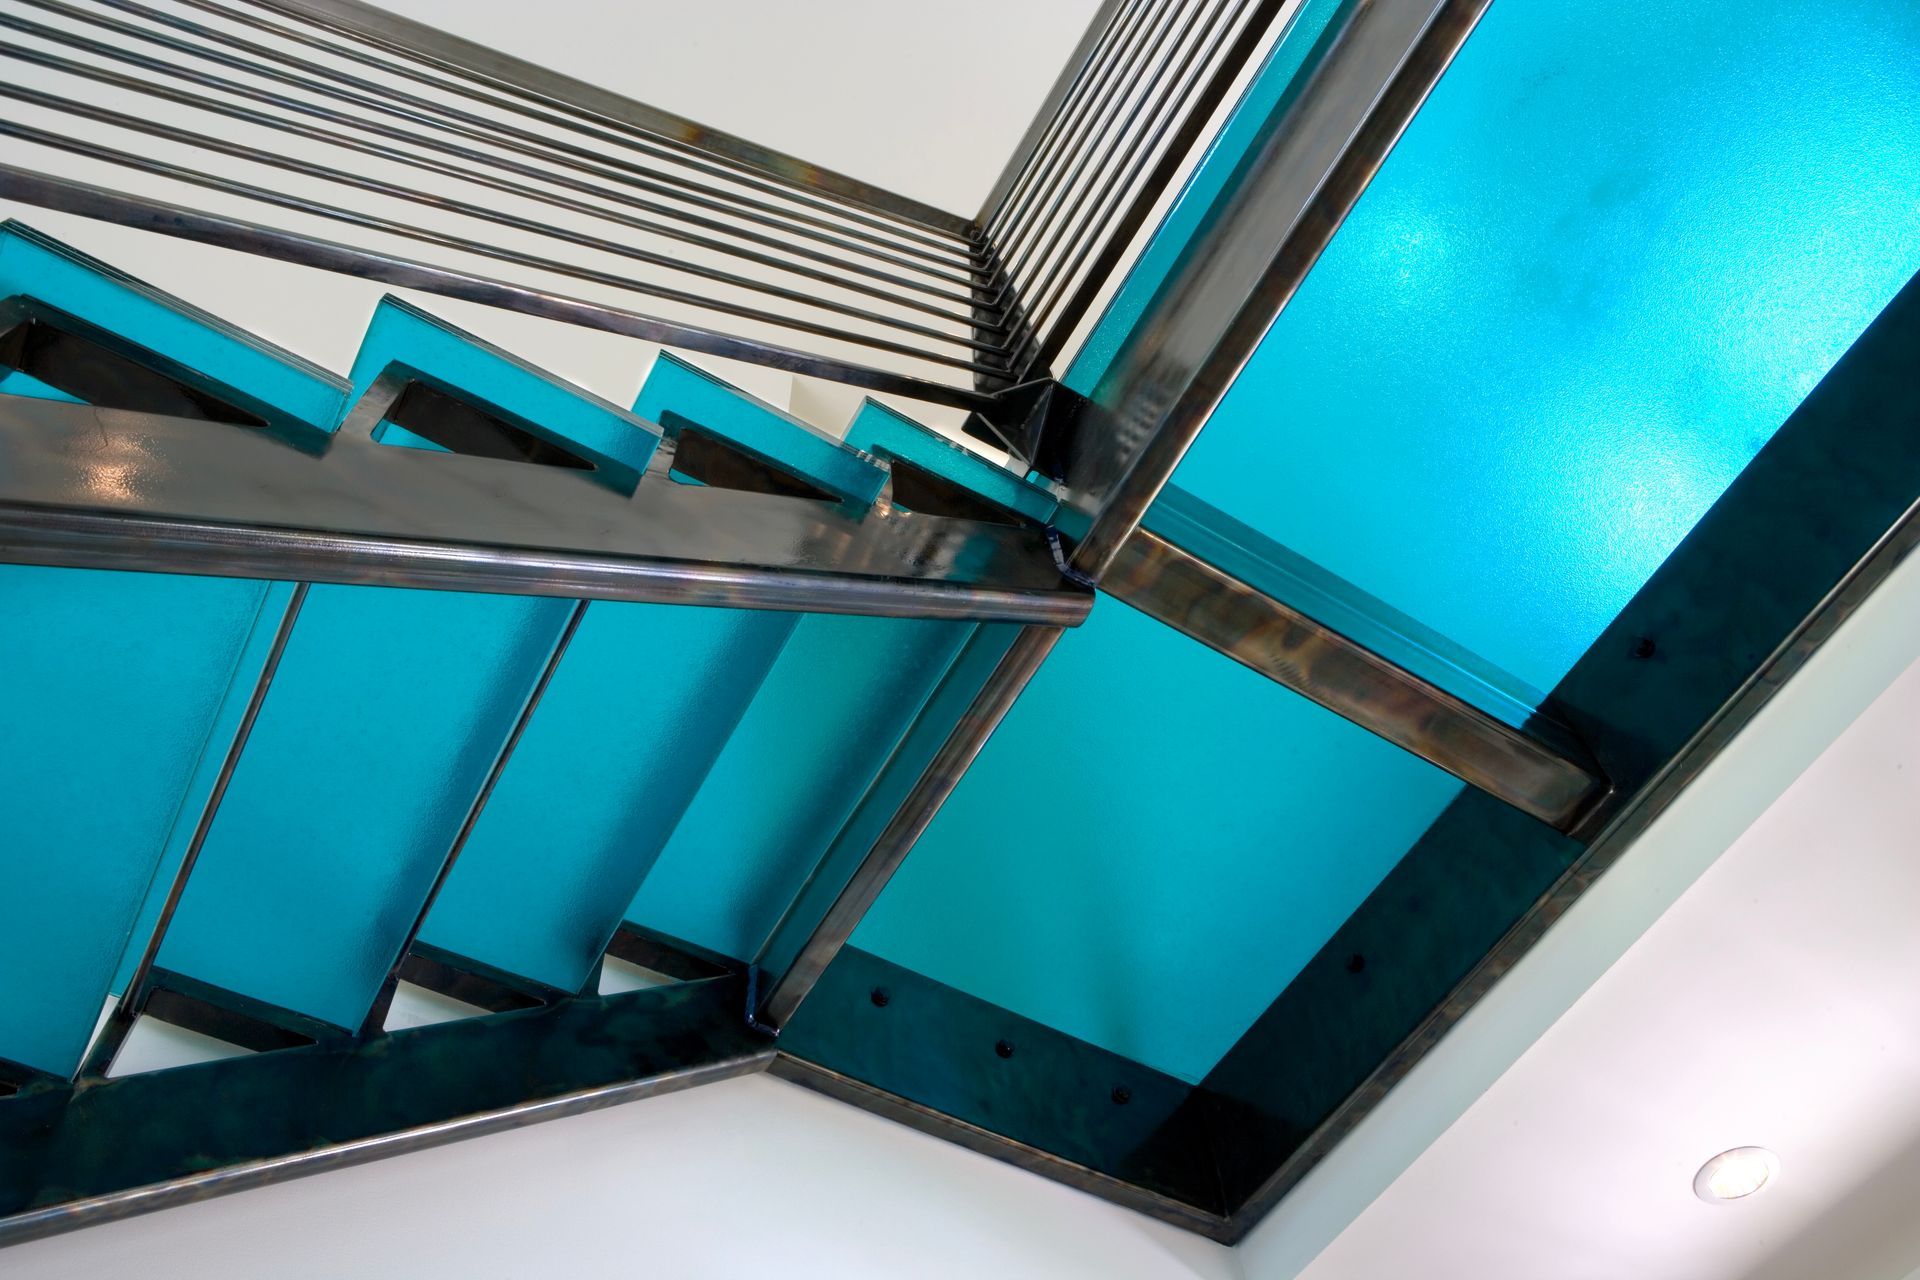 A blue glass staircase.